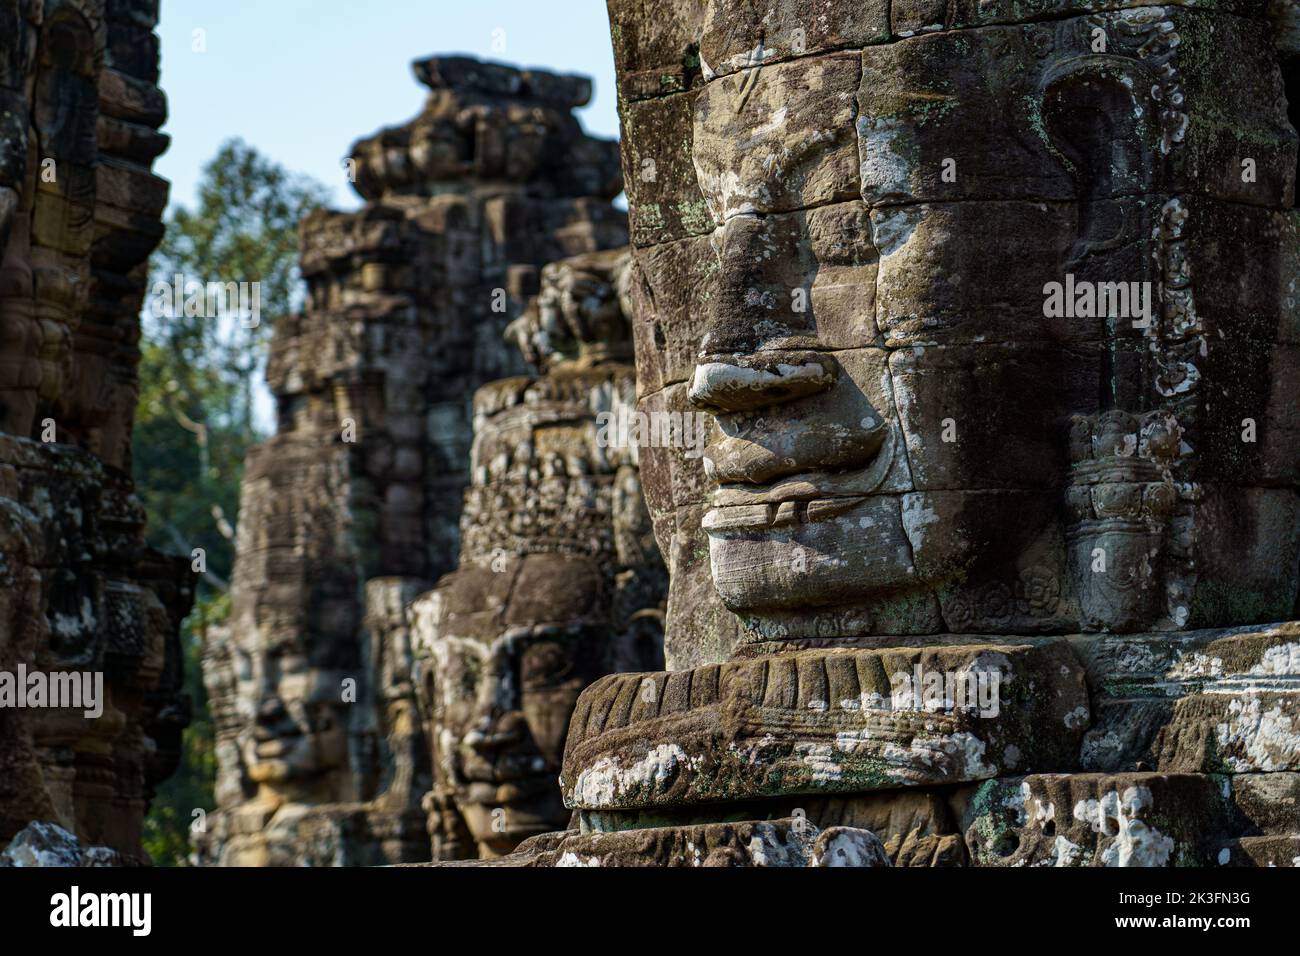 Cambodia. Siem Reap. The archaeological park of Angkor. Heads of Buddha sculpture at Bayon Temple 12th century Hindu temple Stock Photo